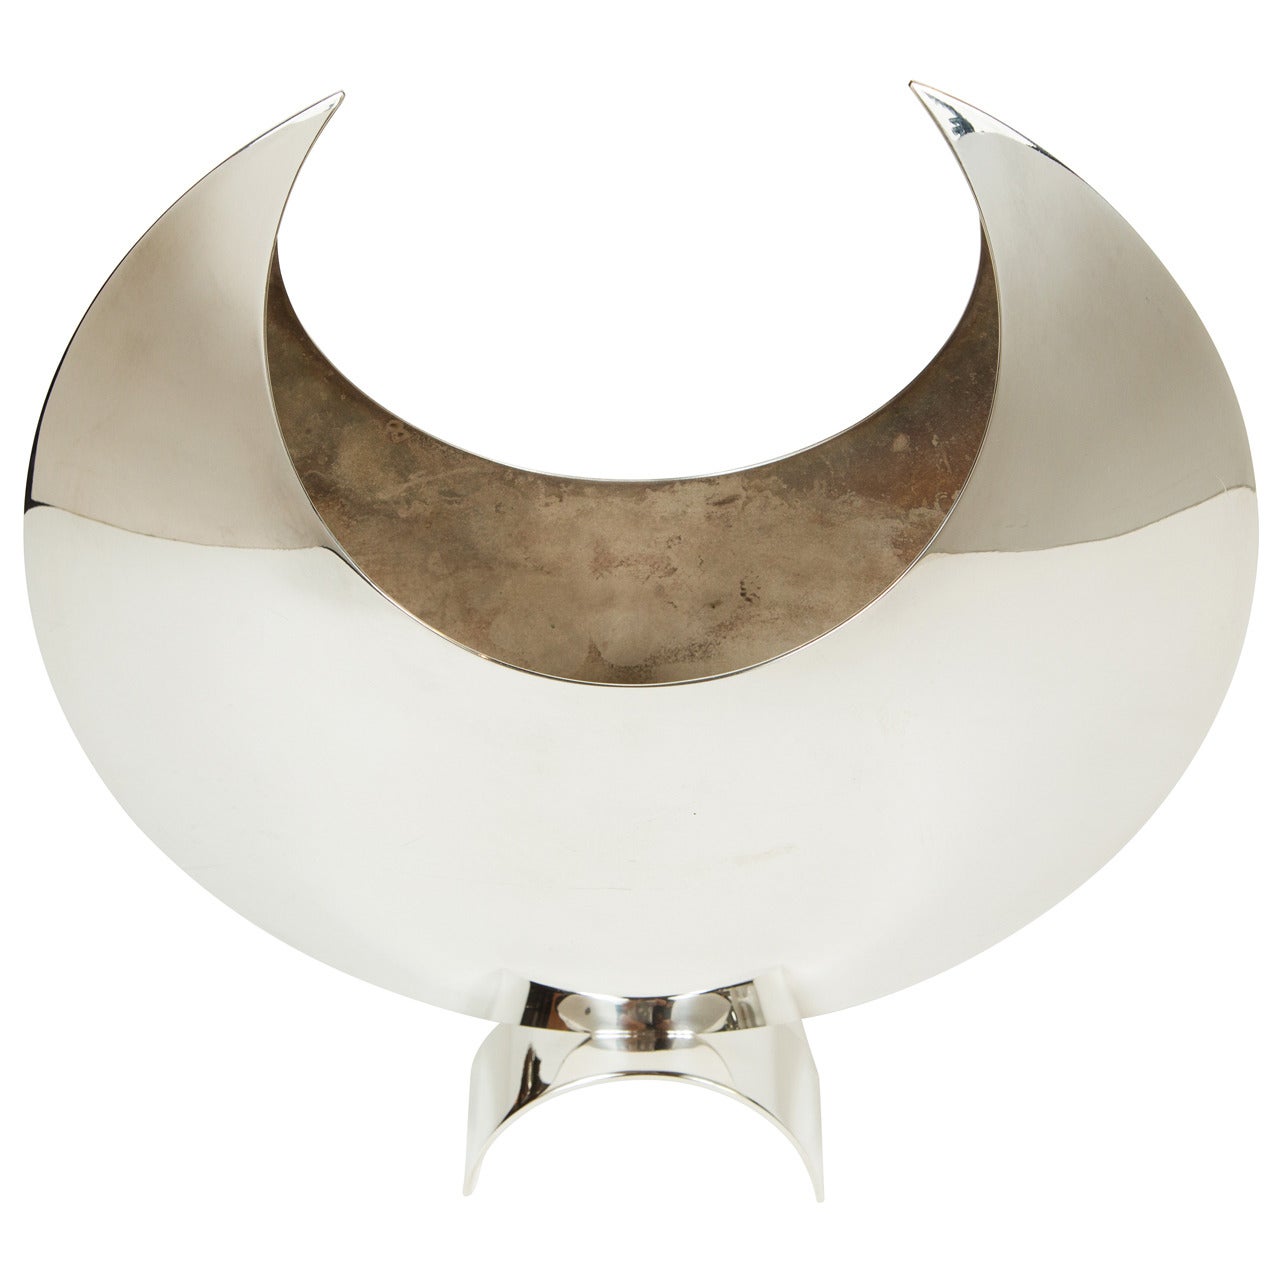 Silver Plate Crescent Moon Vase